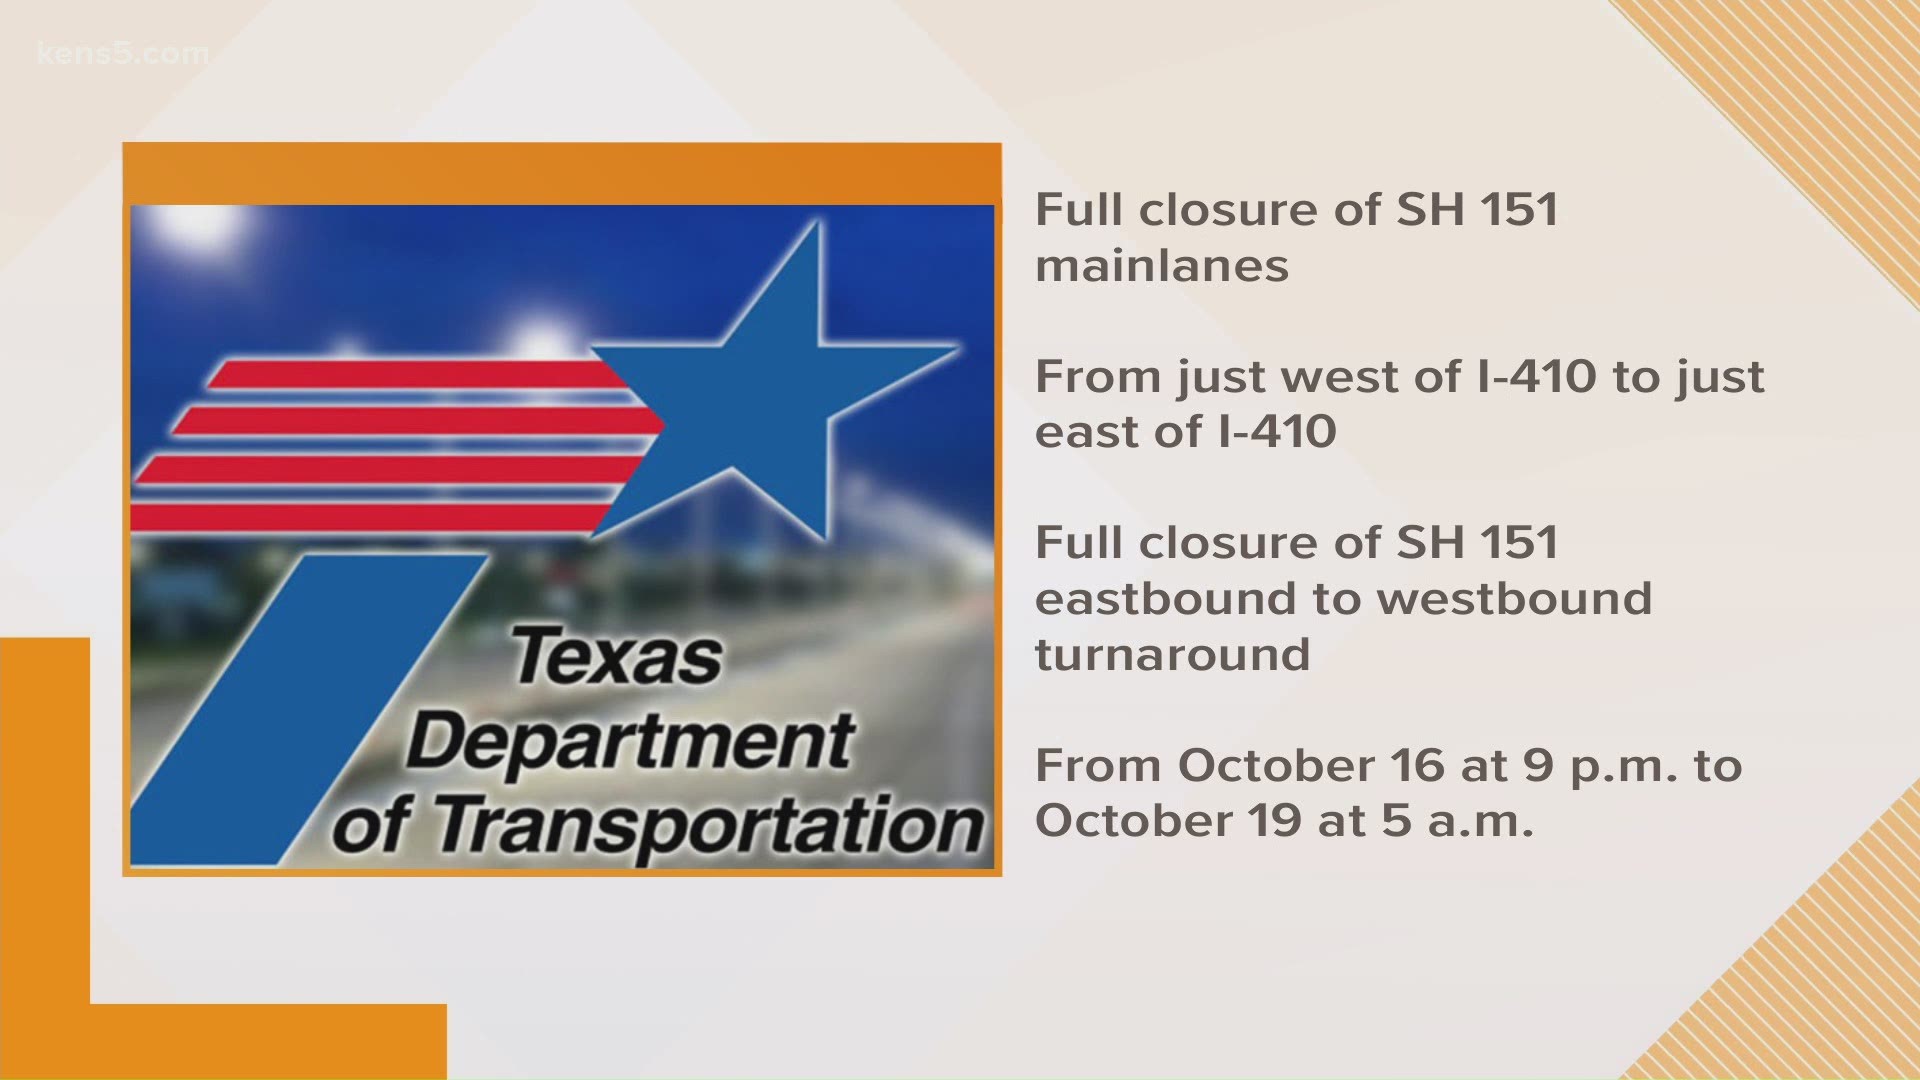 The Texas Department of Transportation has closed down Highway 151 for the weekend so crews can work on the flyover ramps and beam installation.